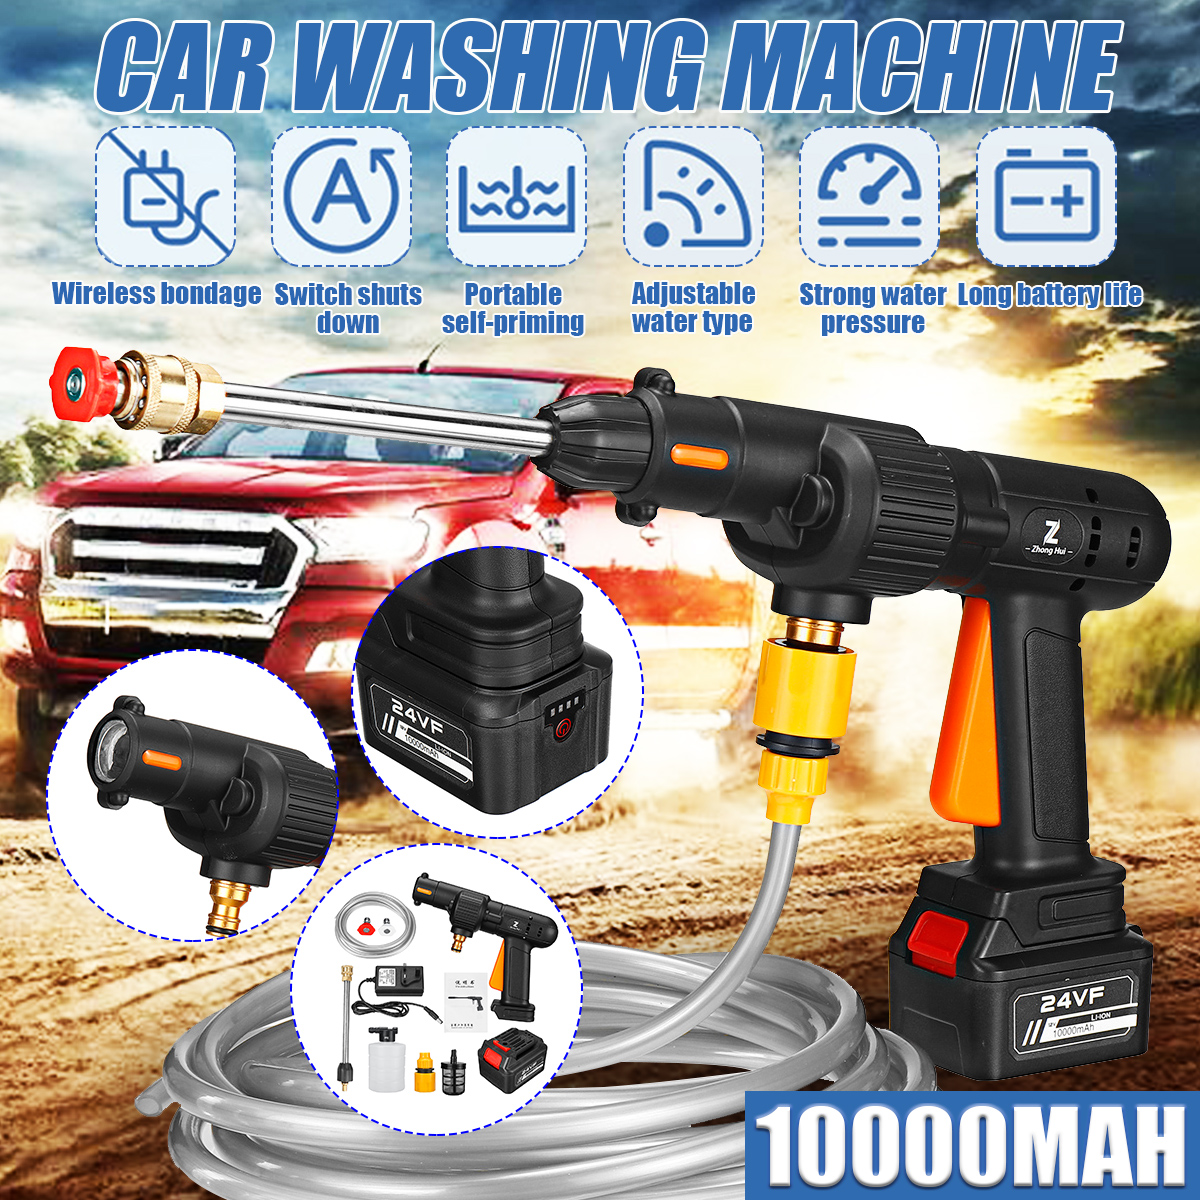 24V-Wireless-Car-Waher-10000mAH-With-Battery-Indicator-Electric-High-Pressure-Washer-Car-Washing-Mac-1856695-4